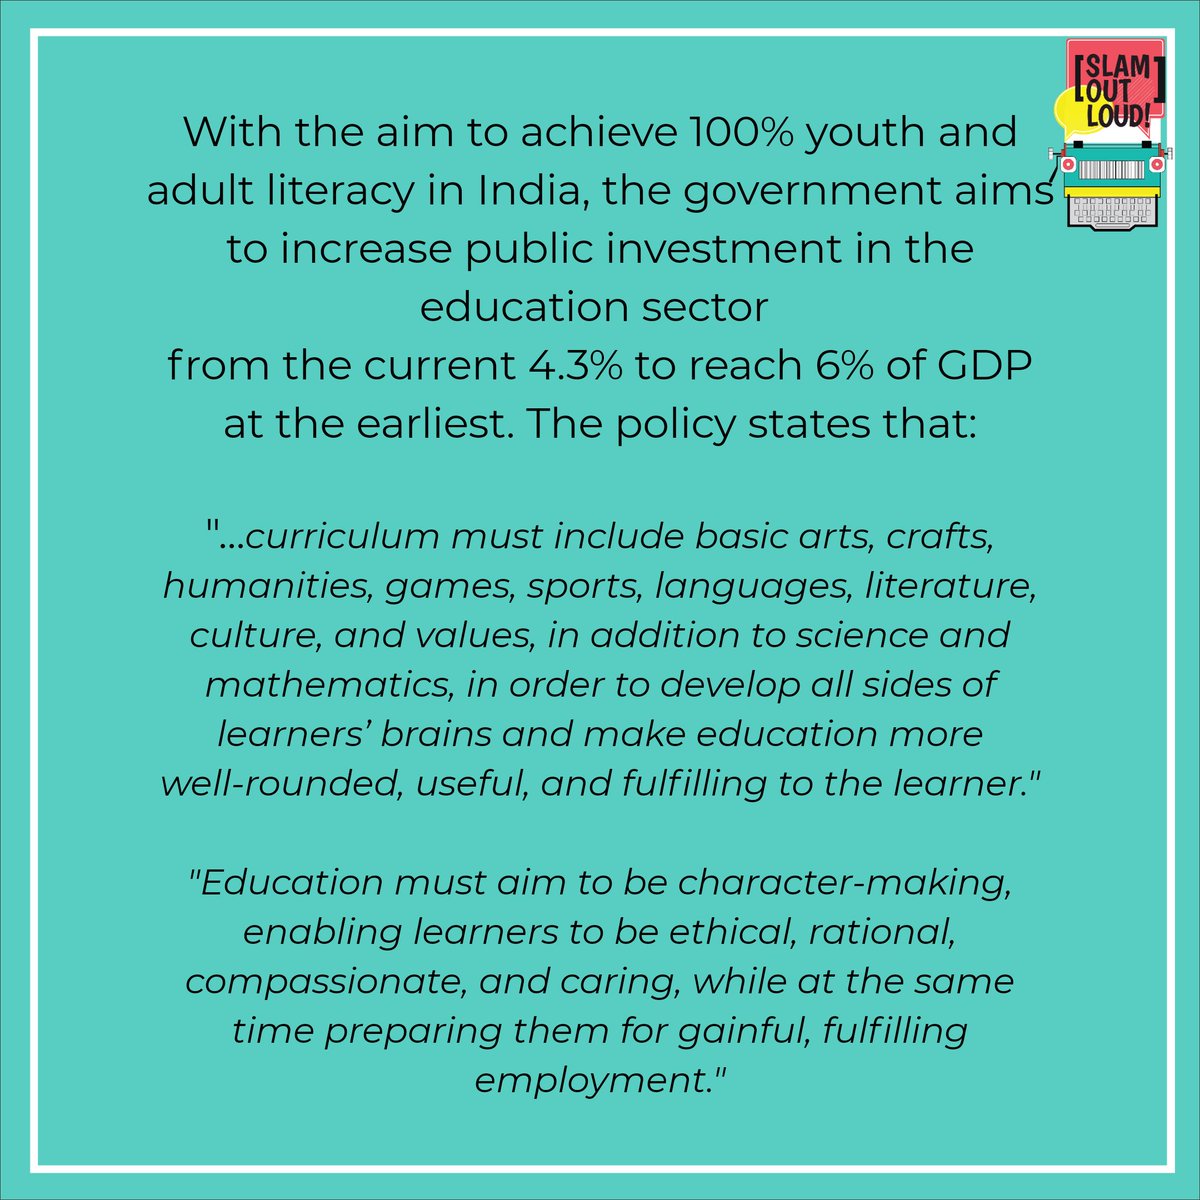 From addressing Universal Access to adopting a Holistic Multidisciplinary approach to Education by introducing regional languages, technology and assessment reforms; the #NEP2020 is a groundbreaking move. Click here for more info on the policy! instagram.com/p/CDagJwCjdA3/…